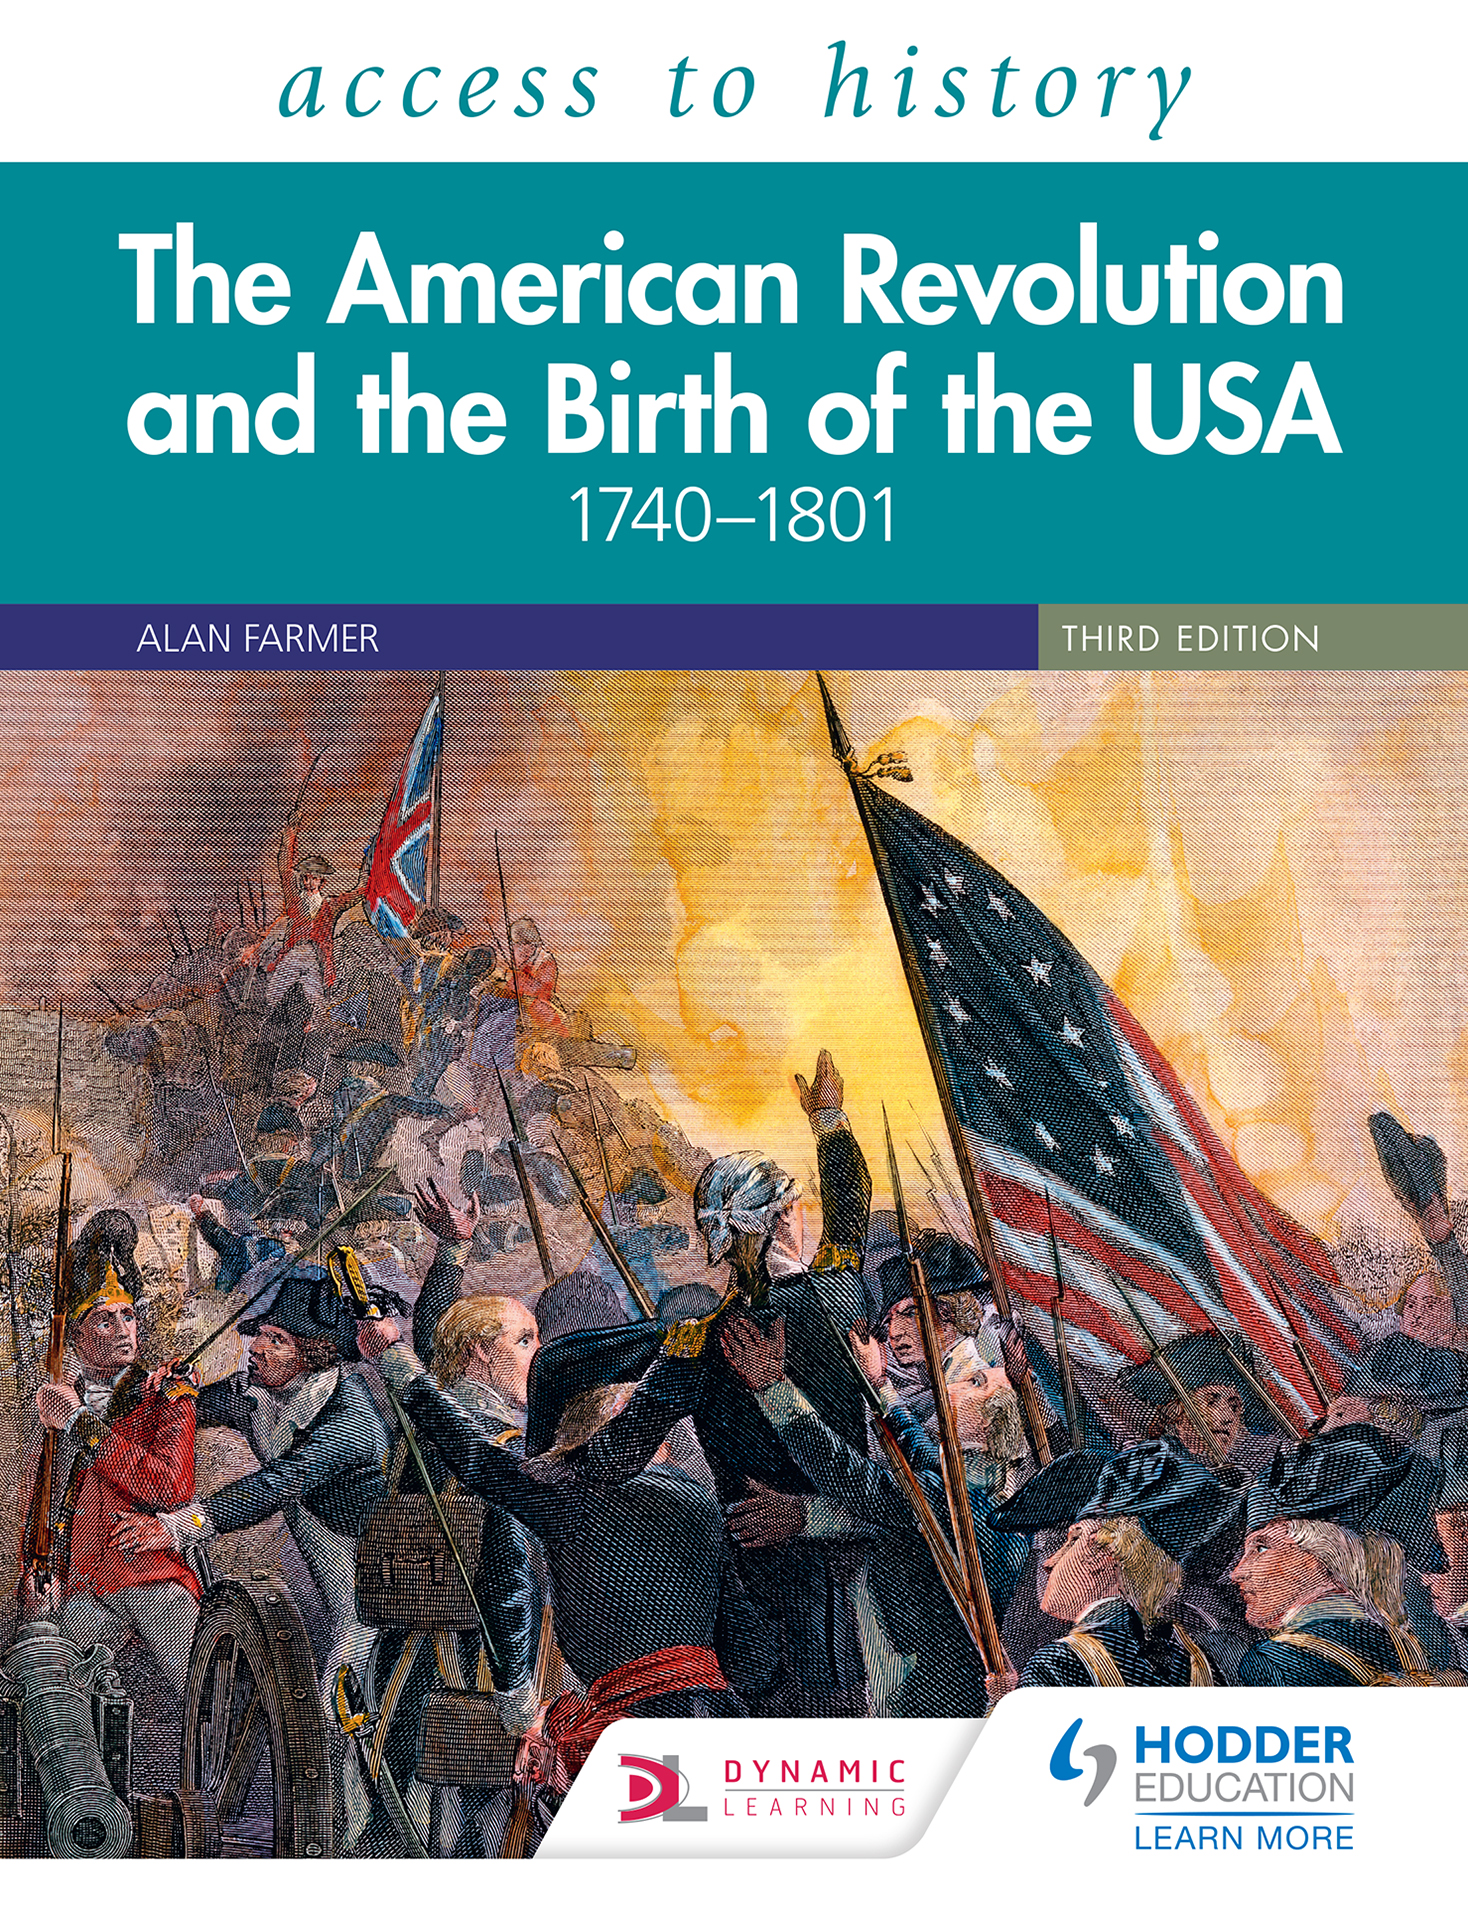 ATH: The American Revolution and the Birth of the USA 3rd edition